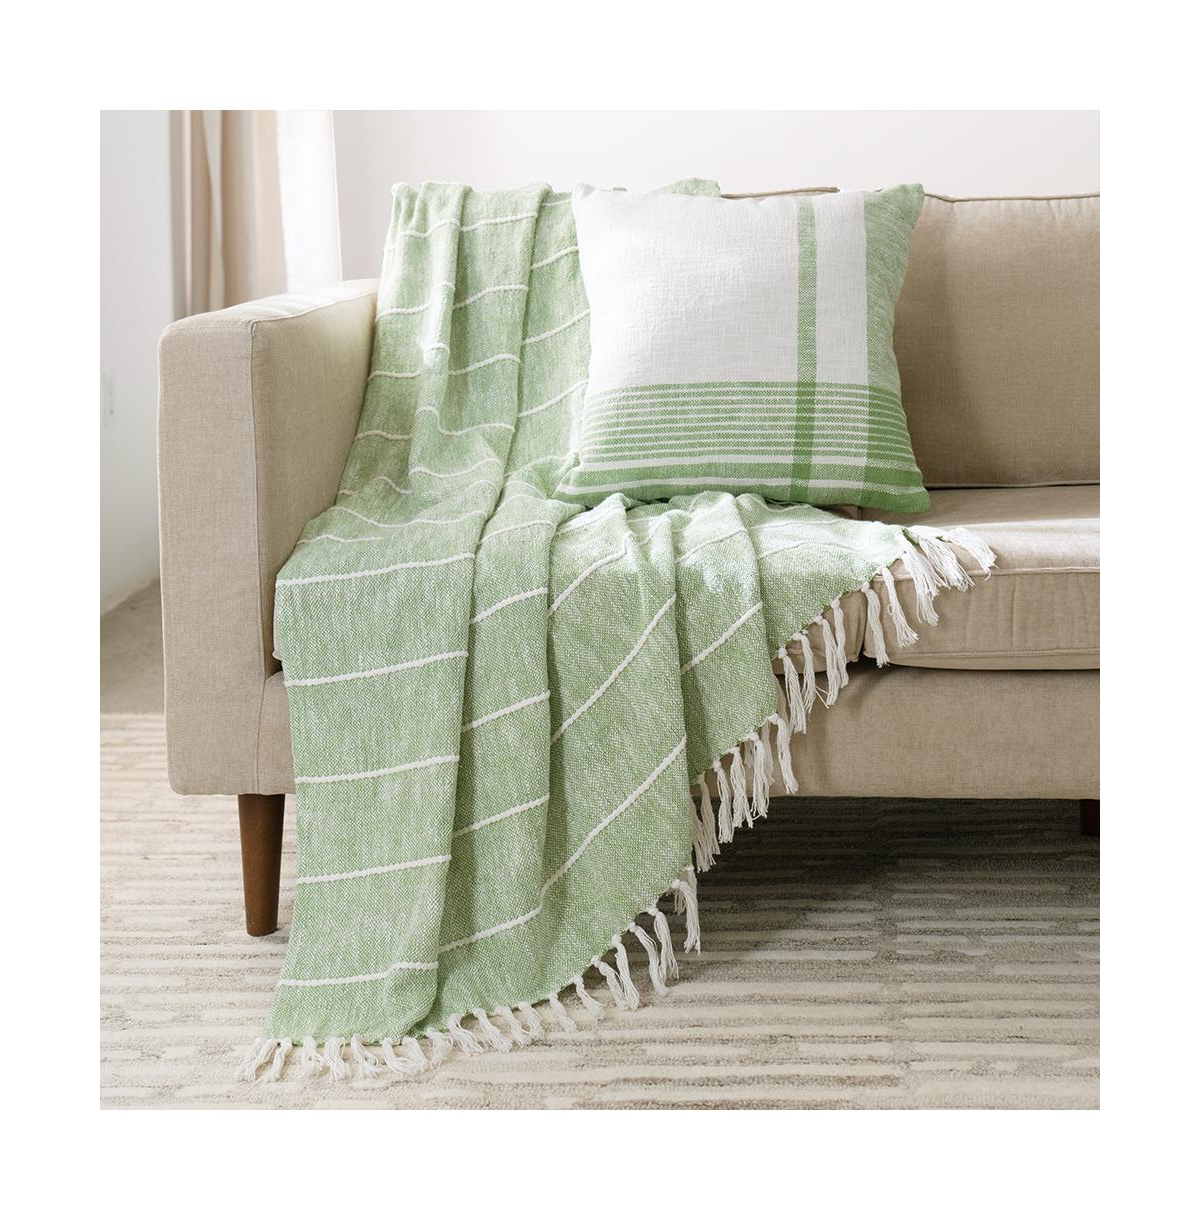 2-Piece Lush Decor Chloe Pillow & Throw Set (Sage) $13.93 + Free Store Pickup at Macy's or Free Shipping on $25+